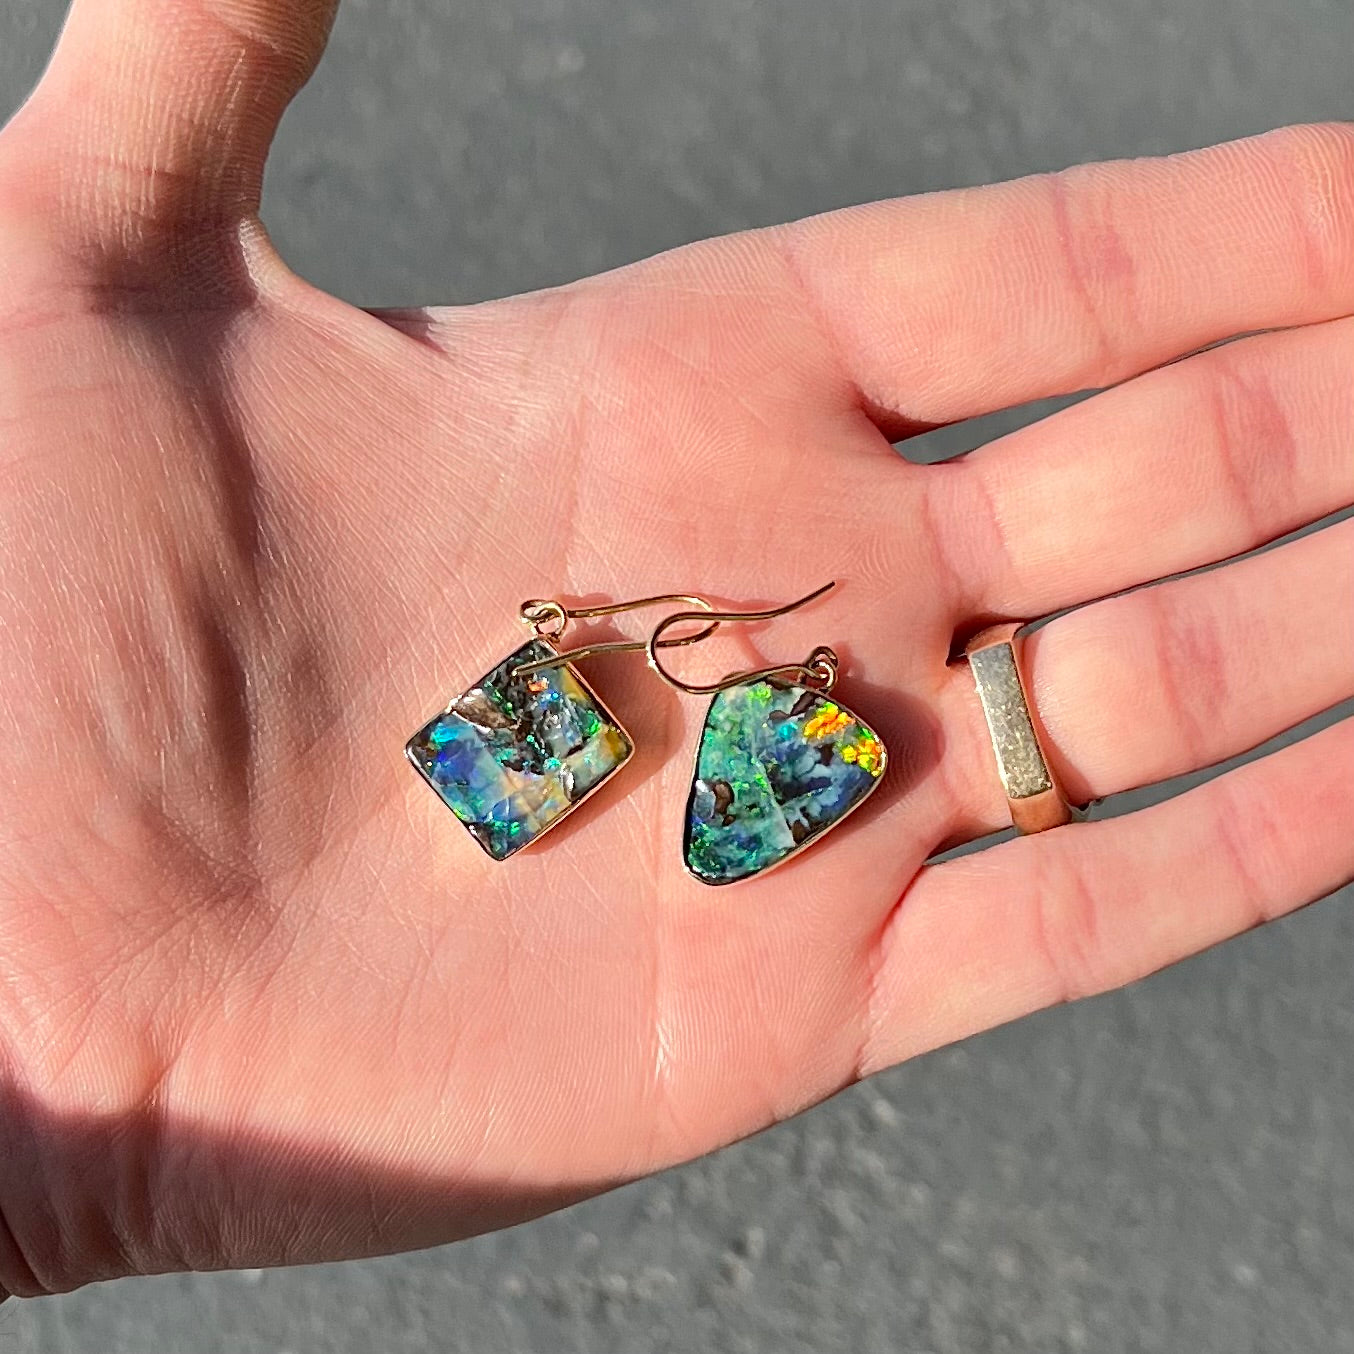 An asymmetric pair of French wire dangle yellow gold boulder opal earrings.  One opal is a square, and the other is a triangle.